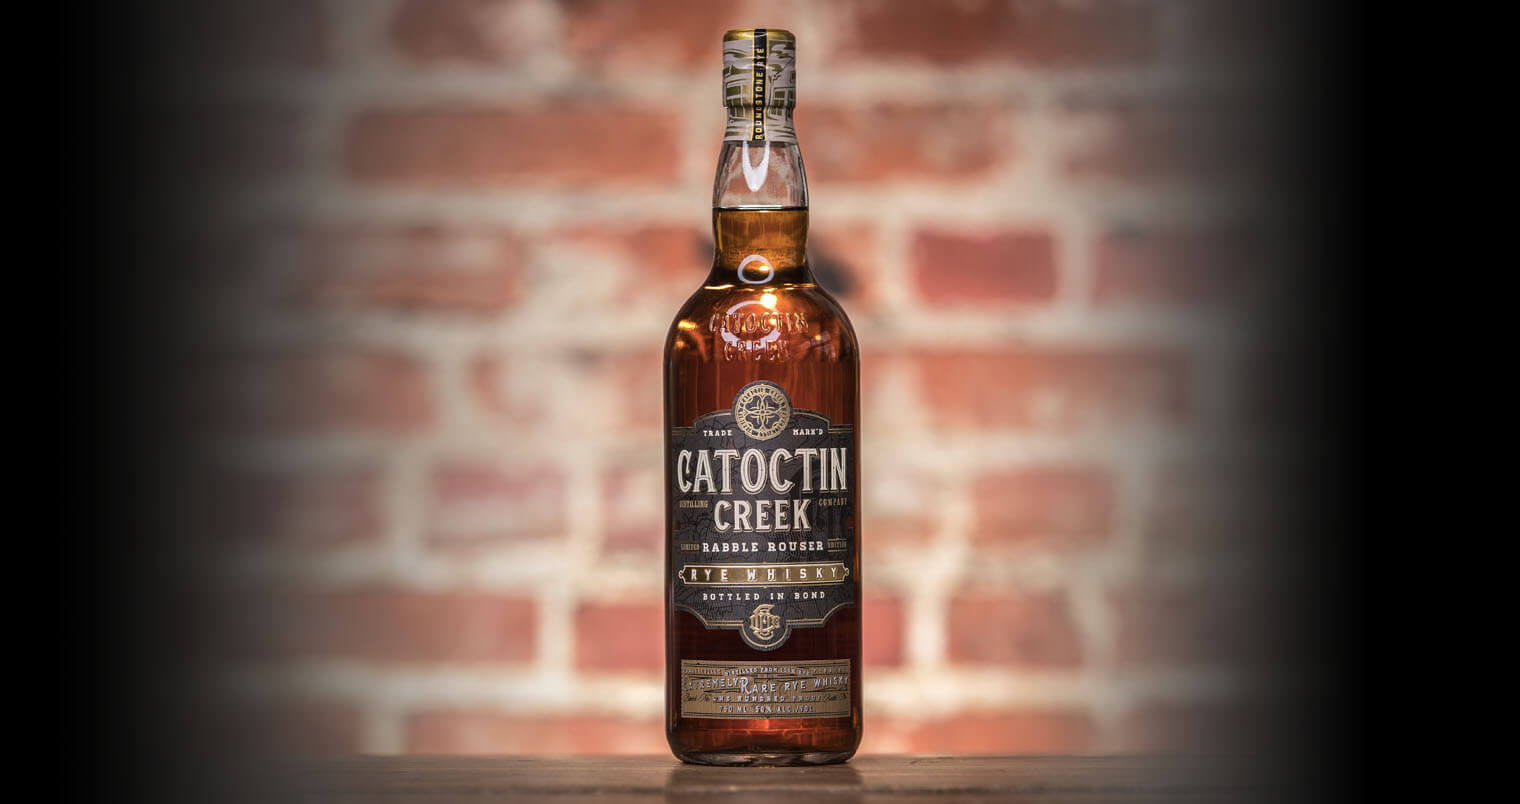 Catoctin Creek Rabble Rouser featured image